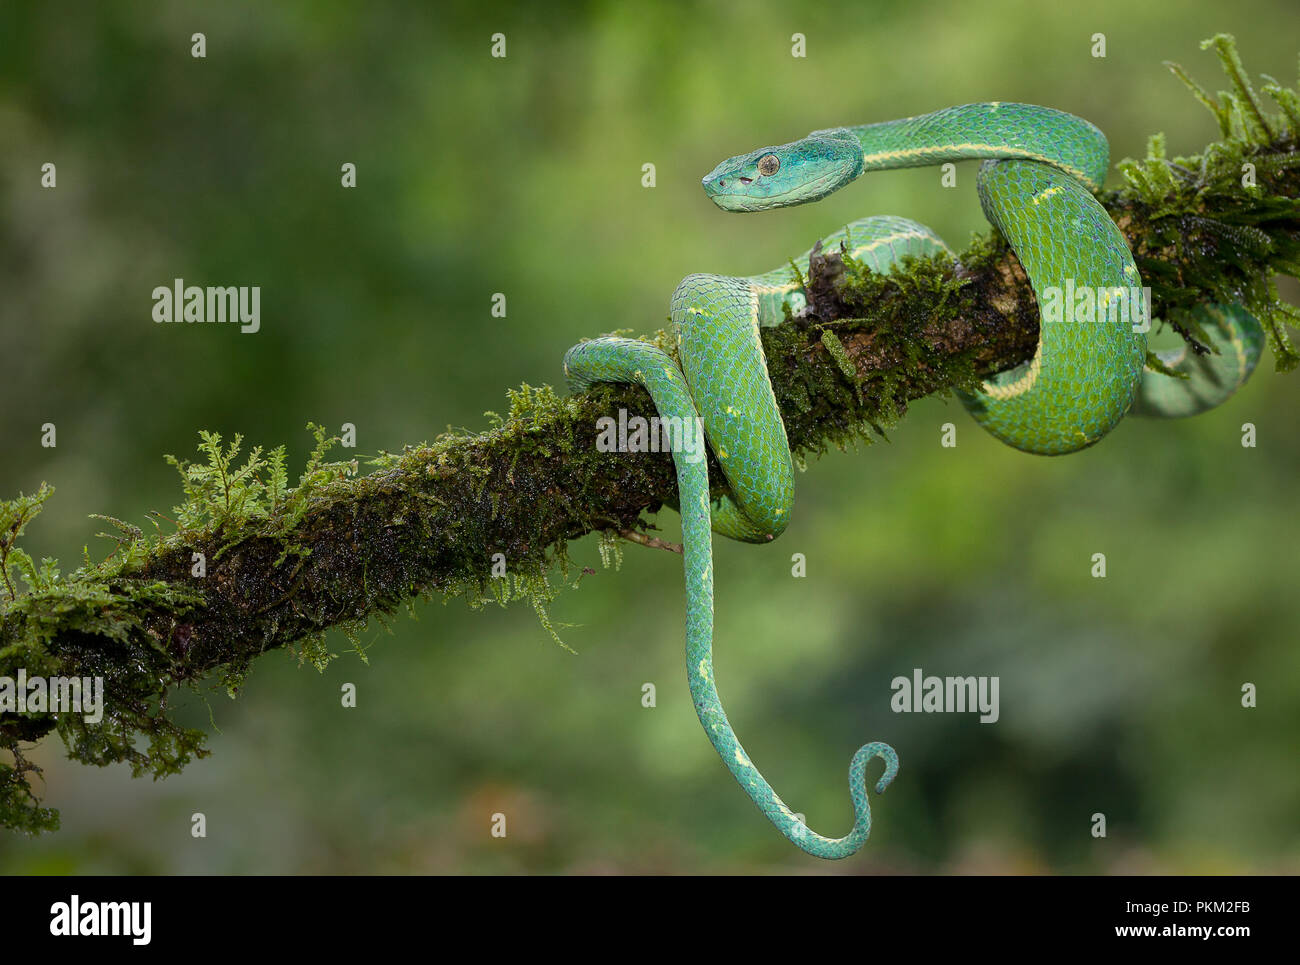 A green palm pitviper photographed in Costa Rica Stock Photo